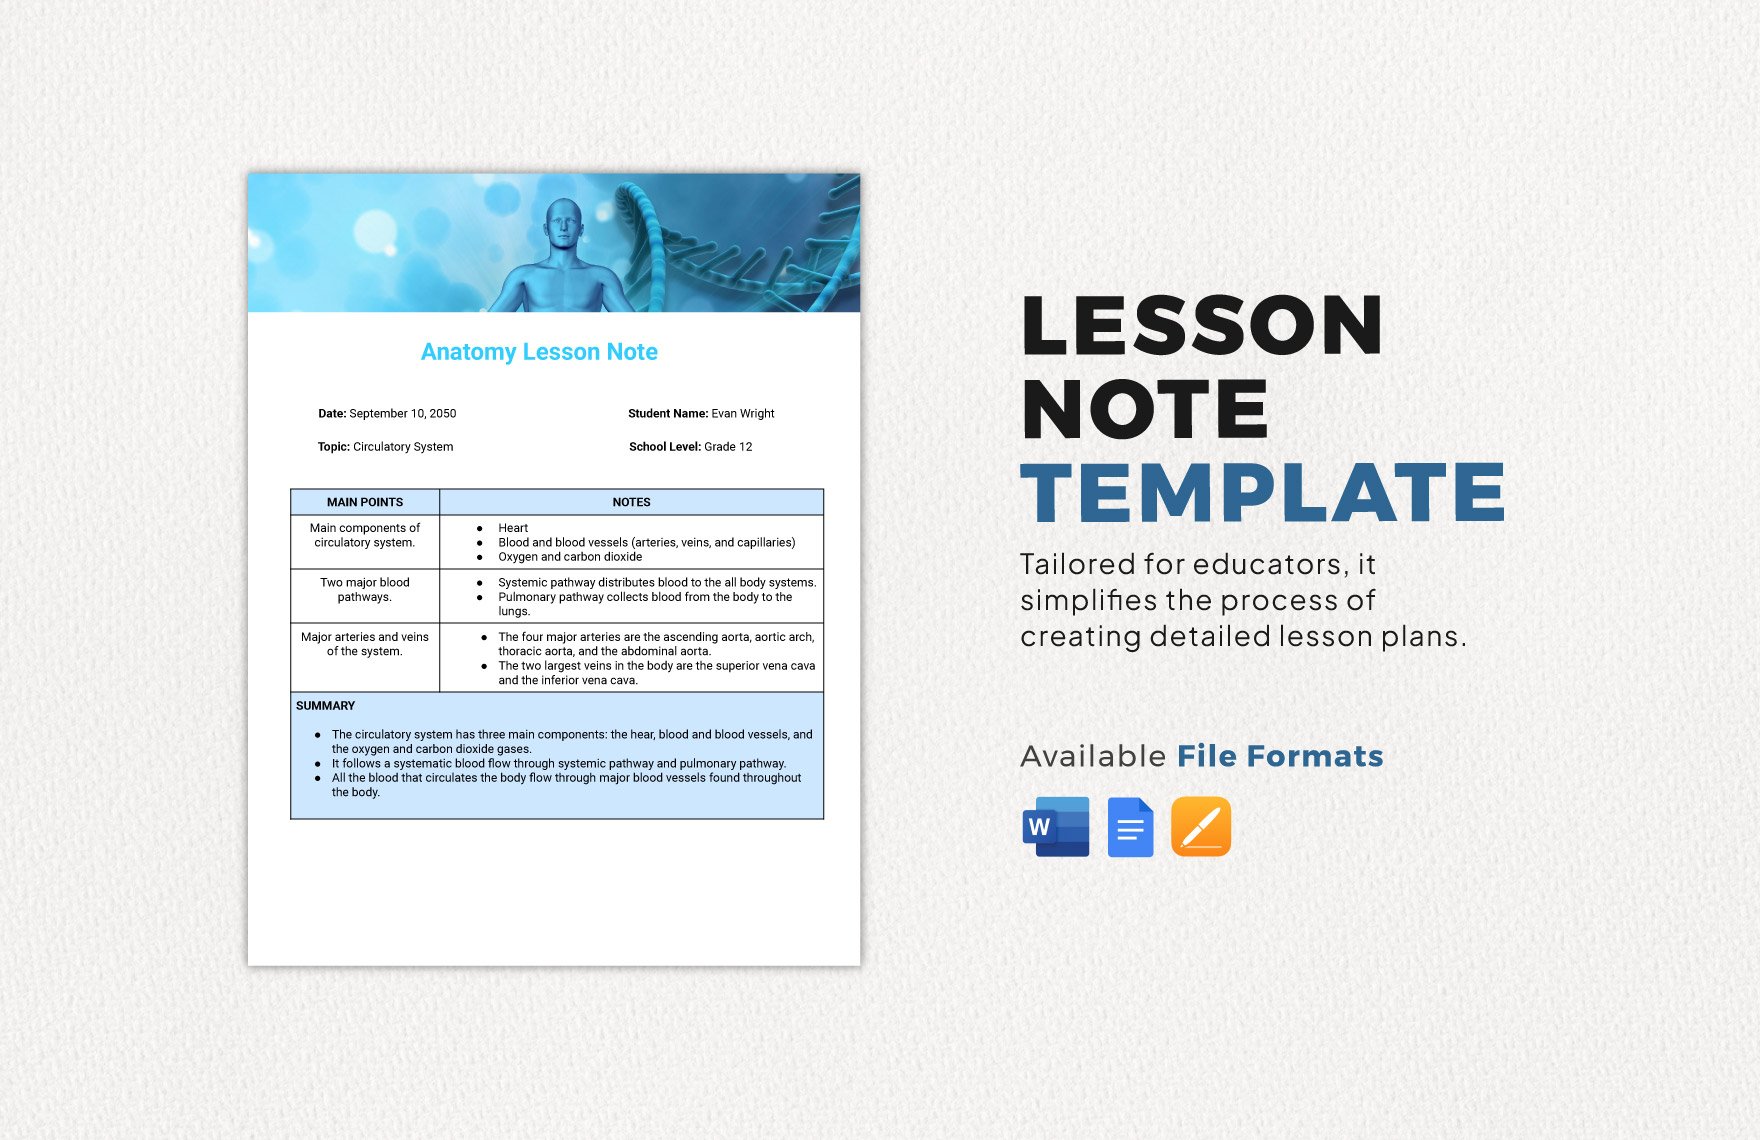 Lesson Note Template